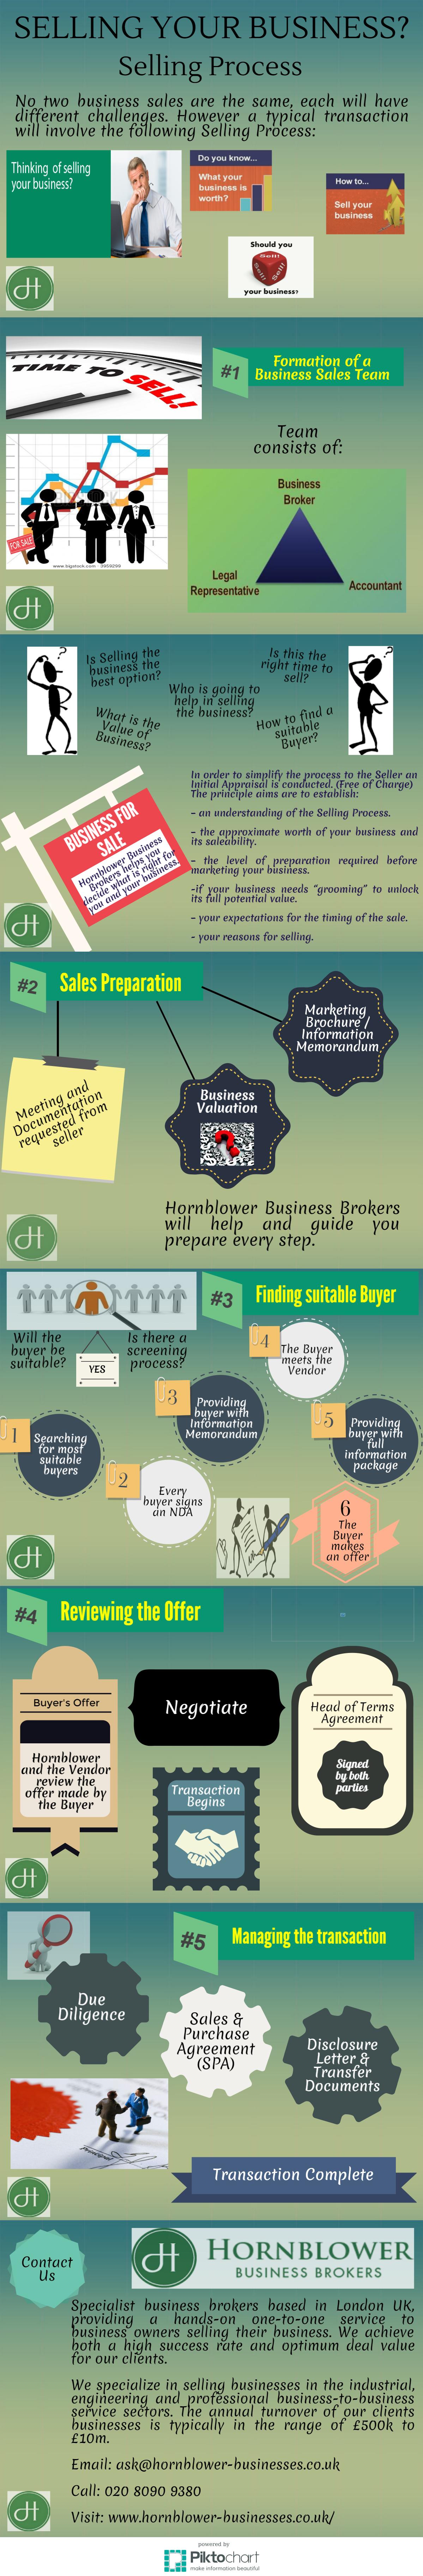 Selling a business process - Infographic